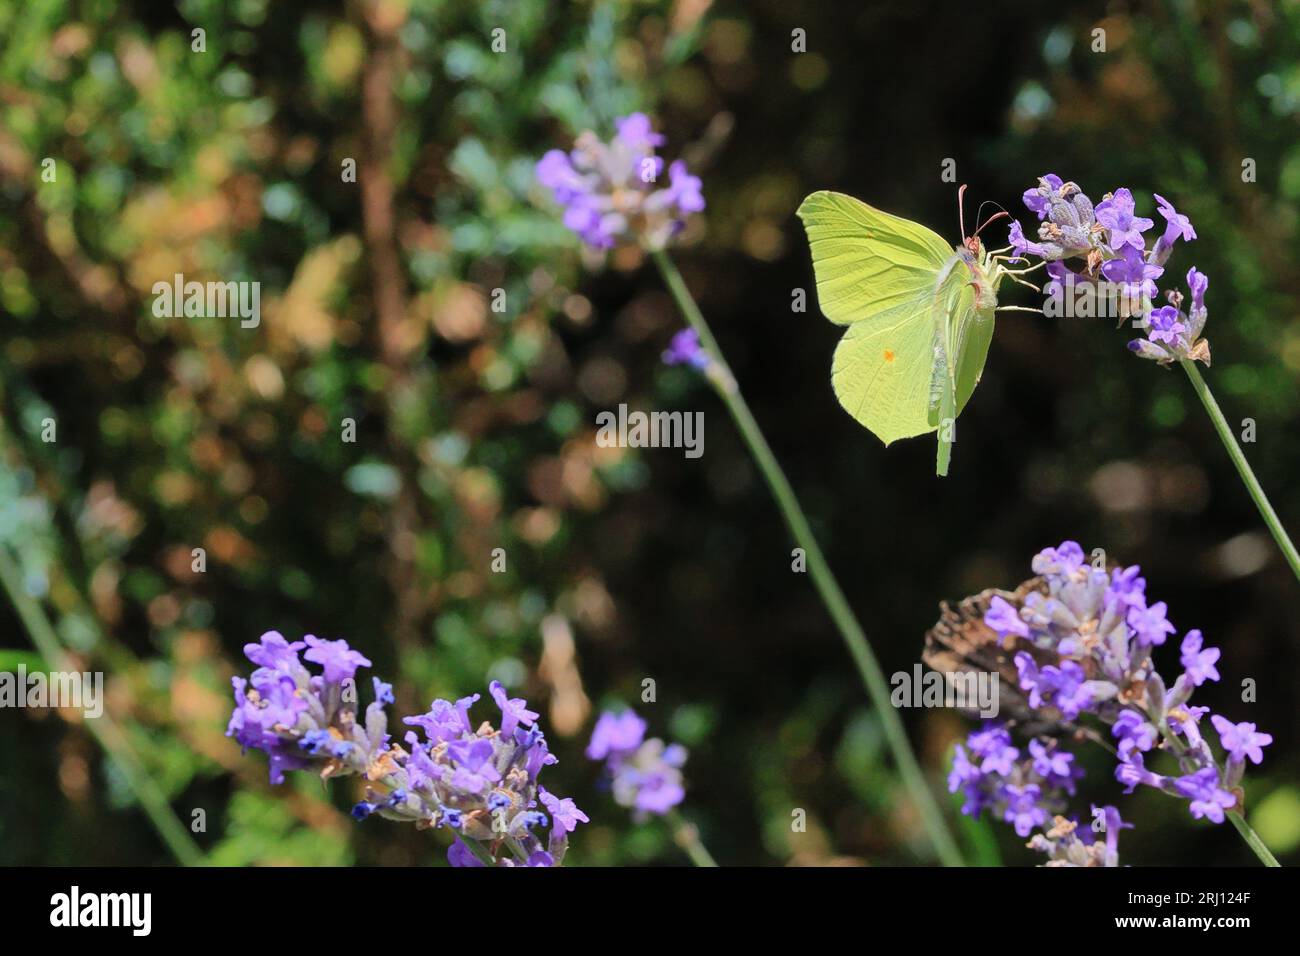 close up of a brimstone butterfly amidst blooming lavender Stock Photo